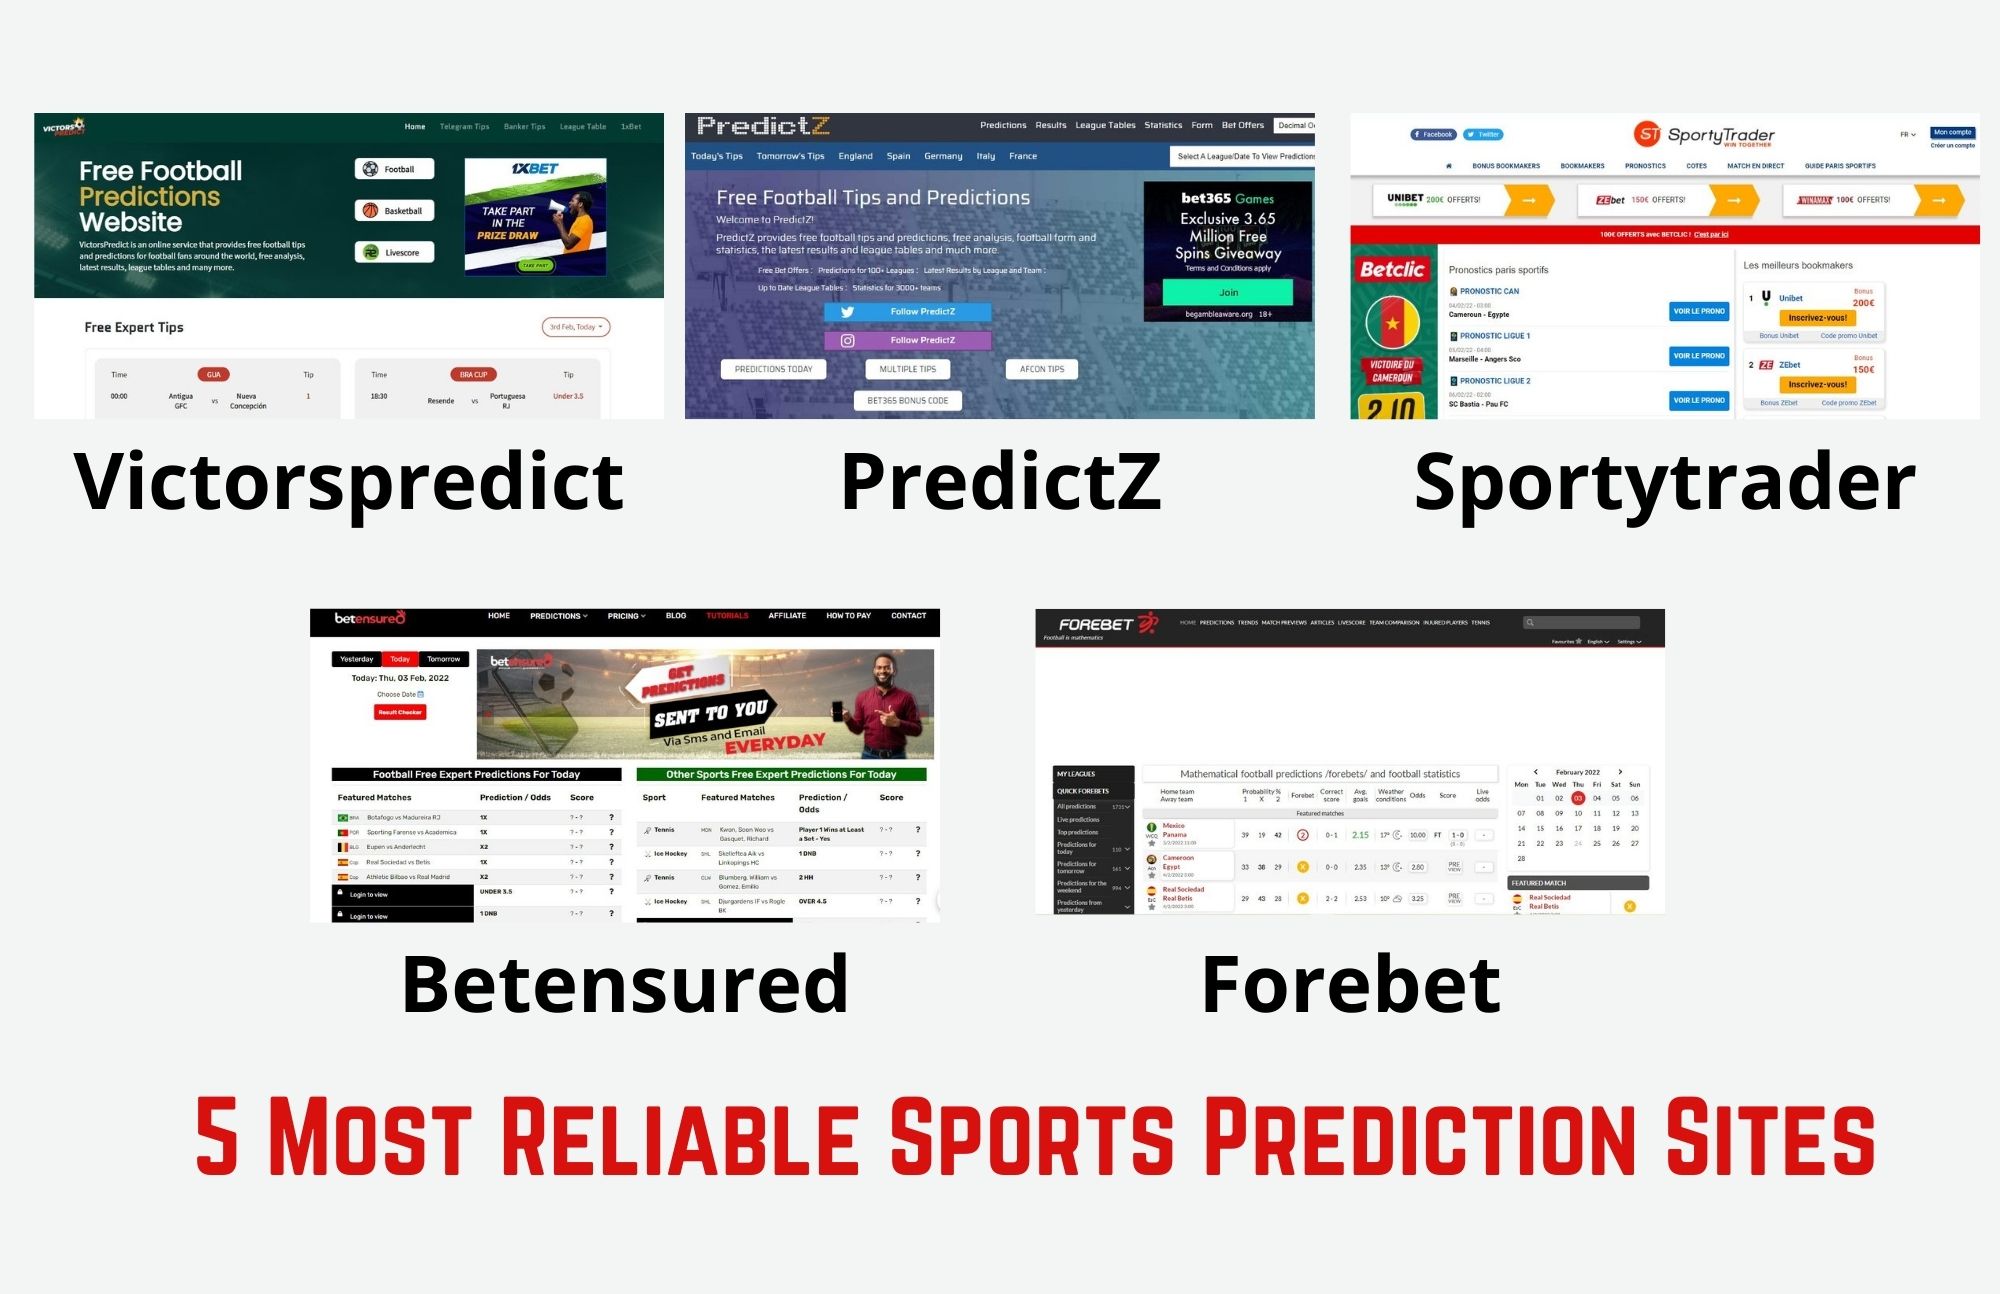 Five well-known sports prediction websites such us Victorspredict, predictZ, and Sportytrader listed on top while Betensured  and forebet are presented below.  